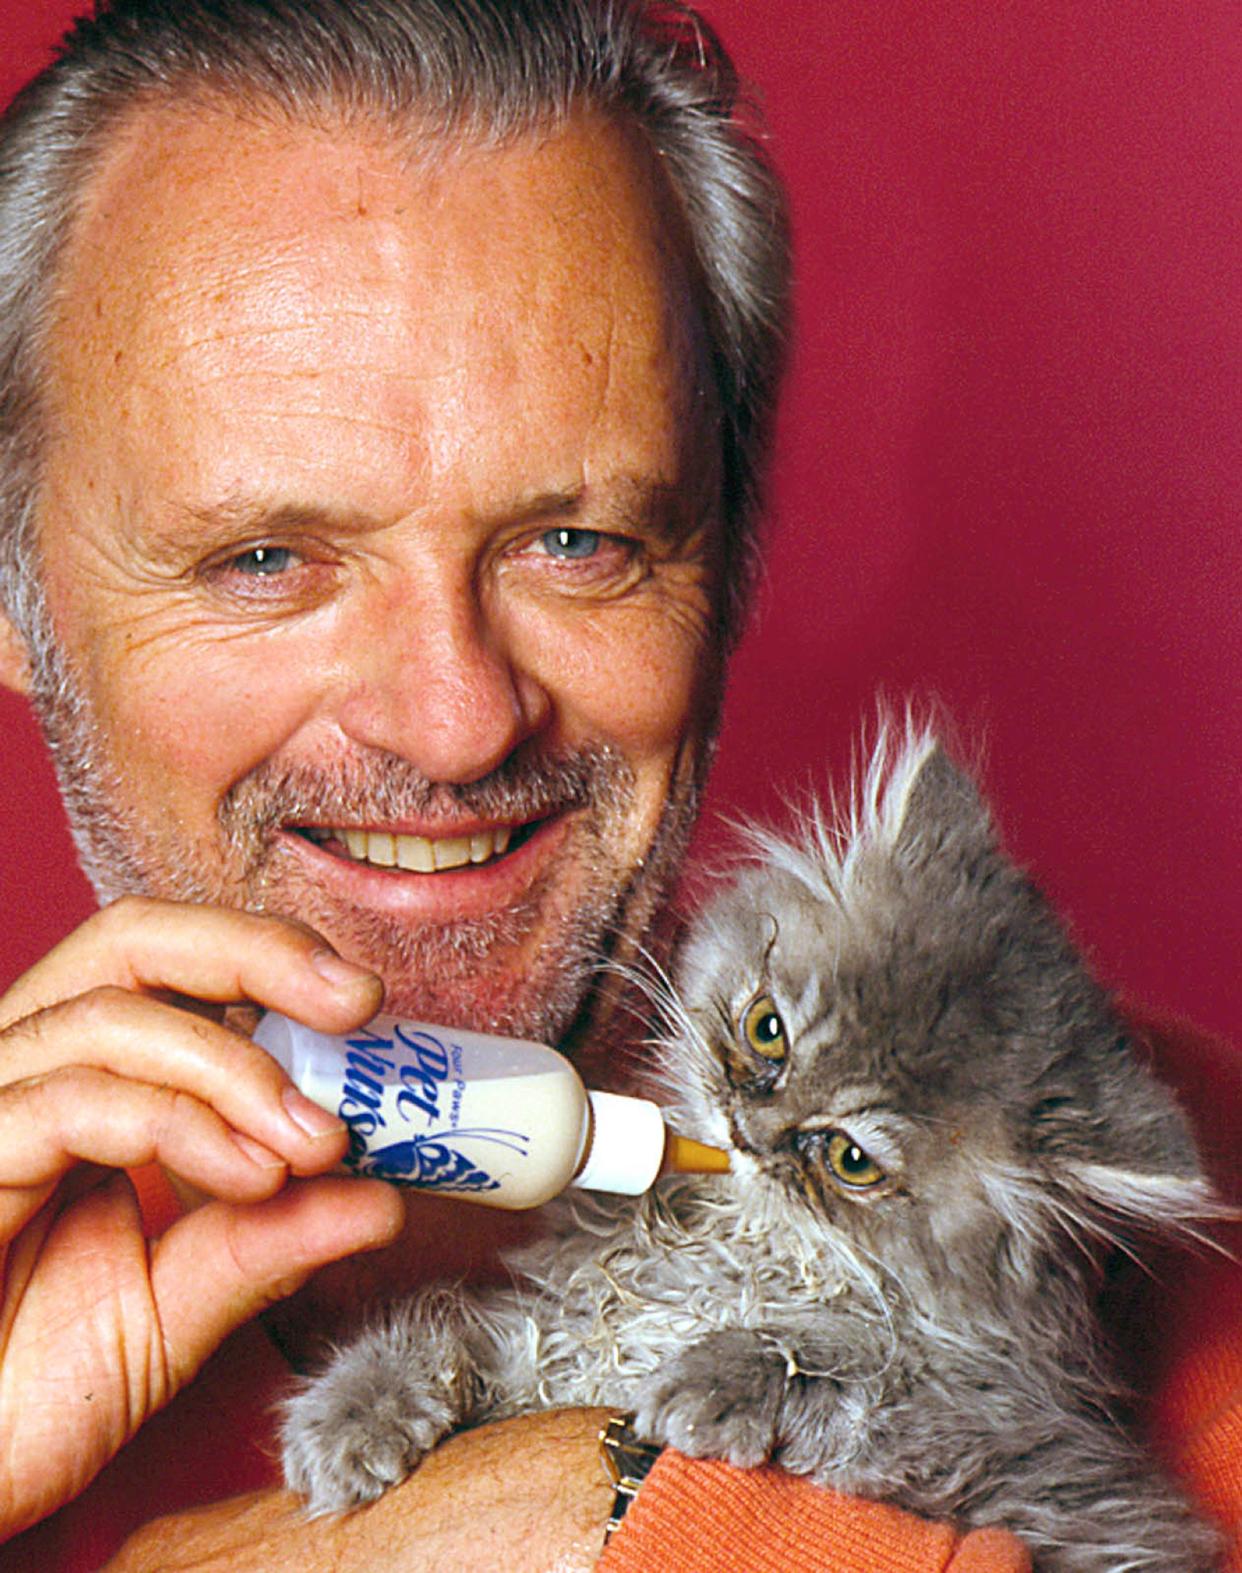 https://www.gettyimages.co.uk/detail/news-photo/award-winning-actor-anthony-hopkins-feeding-kitten-at-his-news-photo/1206086588